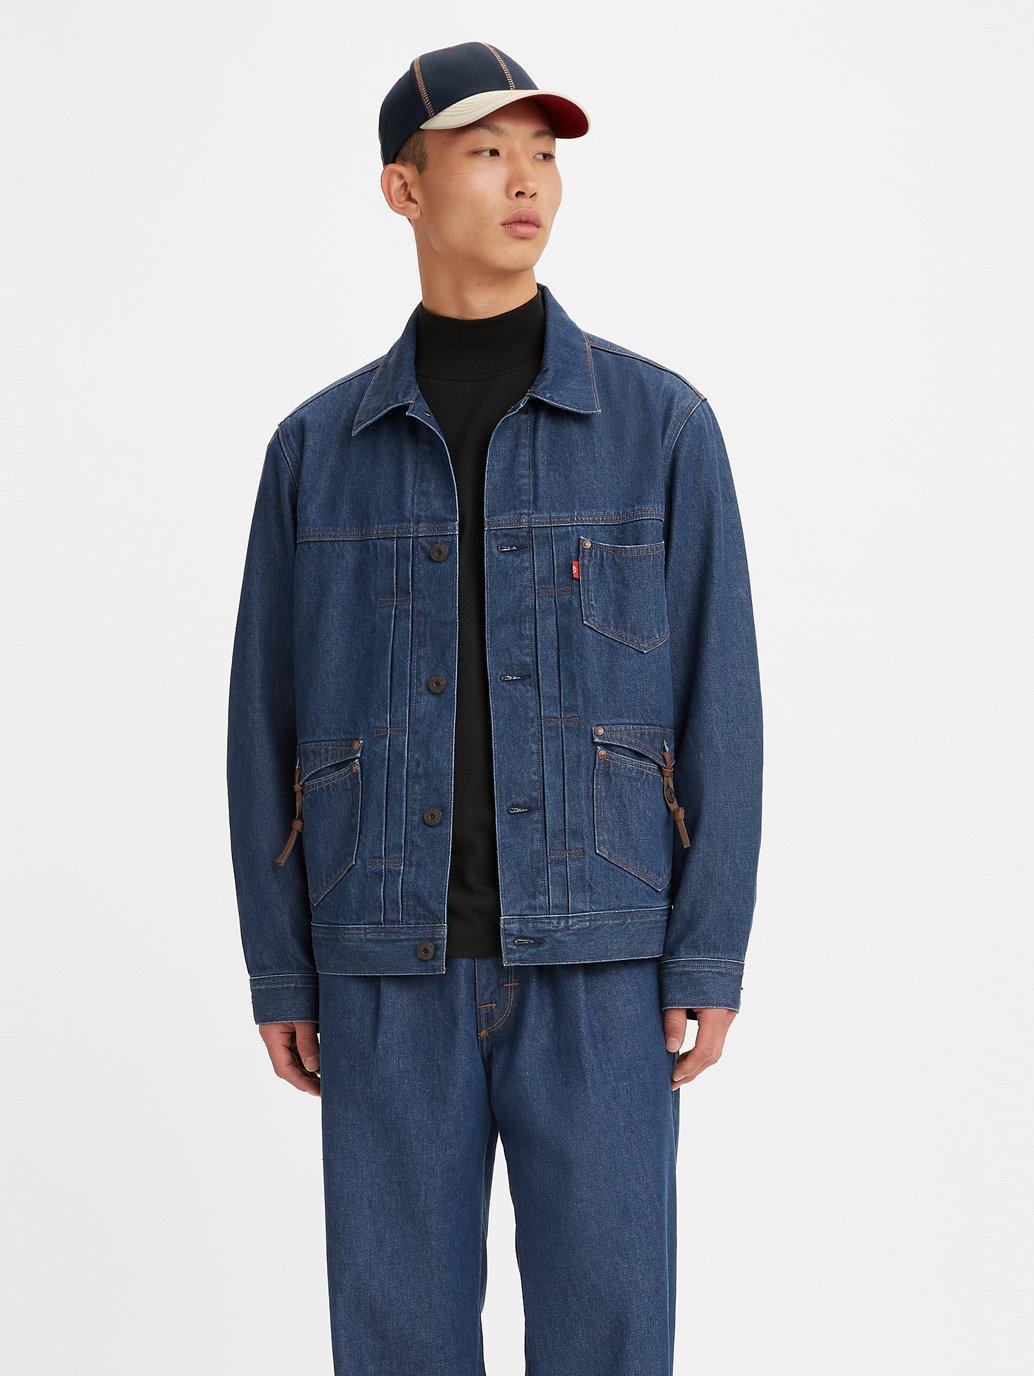 Levi's® Hong Kong Red™男士 Type II 牛仔褸 牛仔外套 for unisex - A26990000